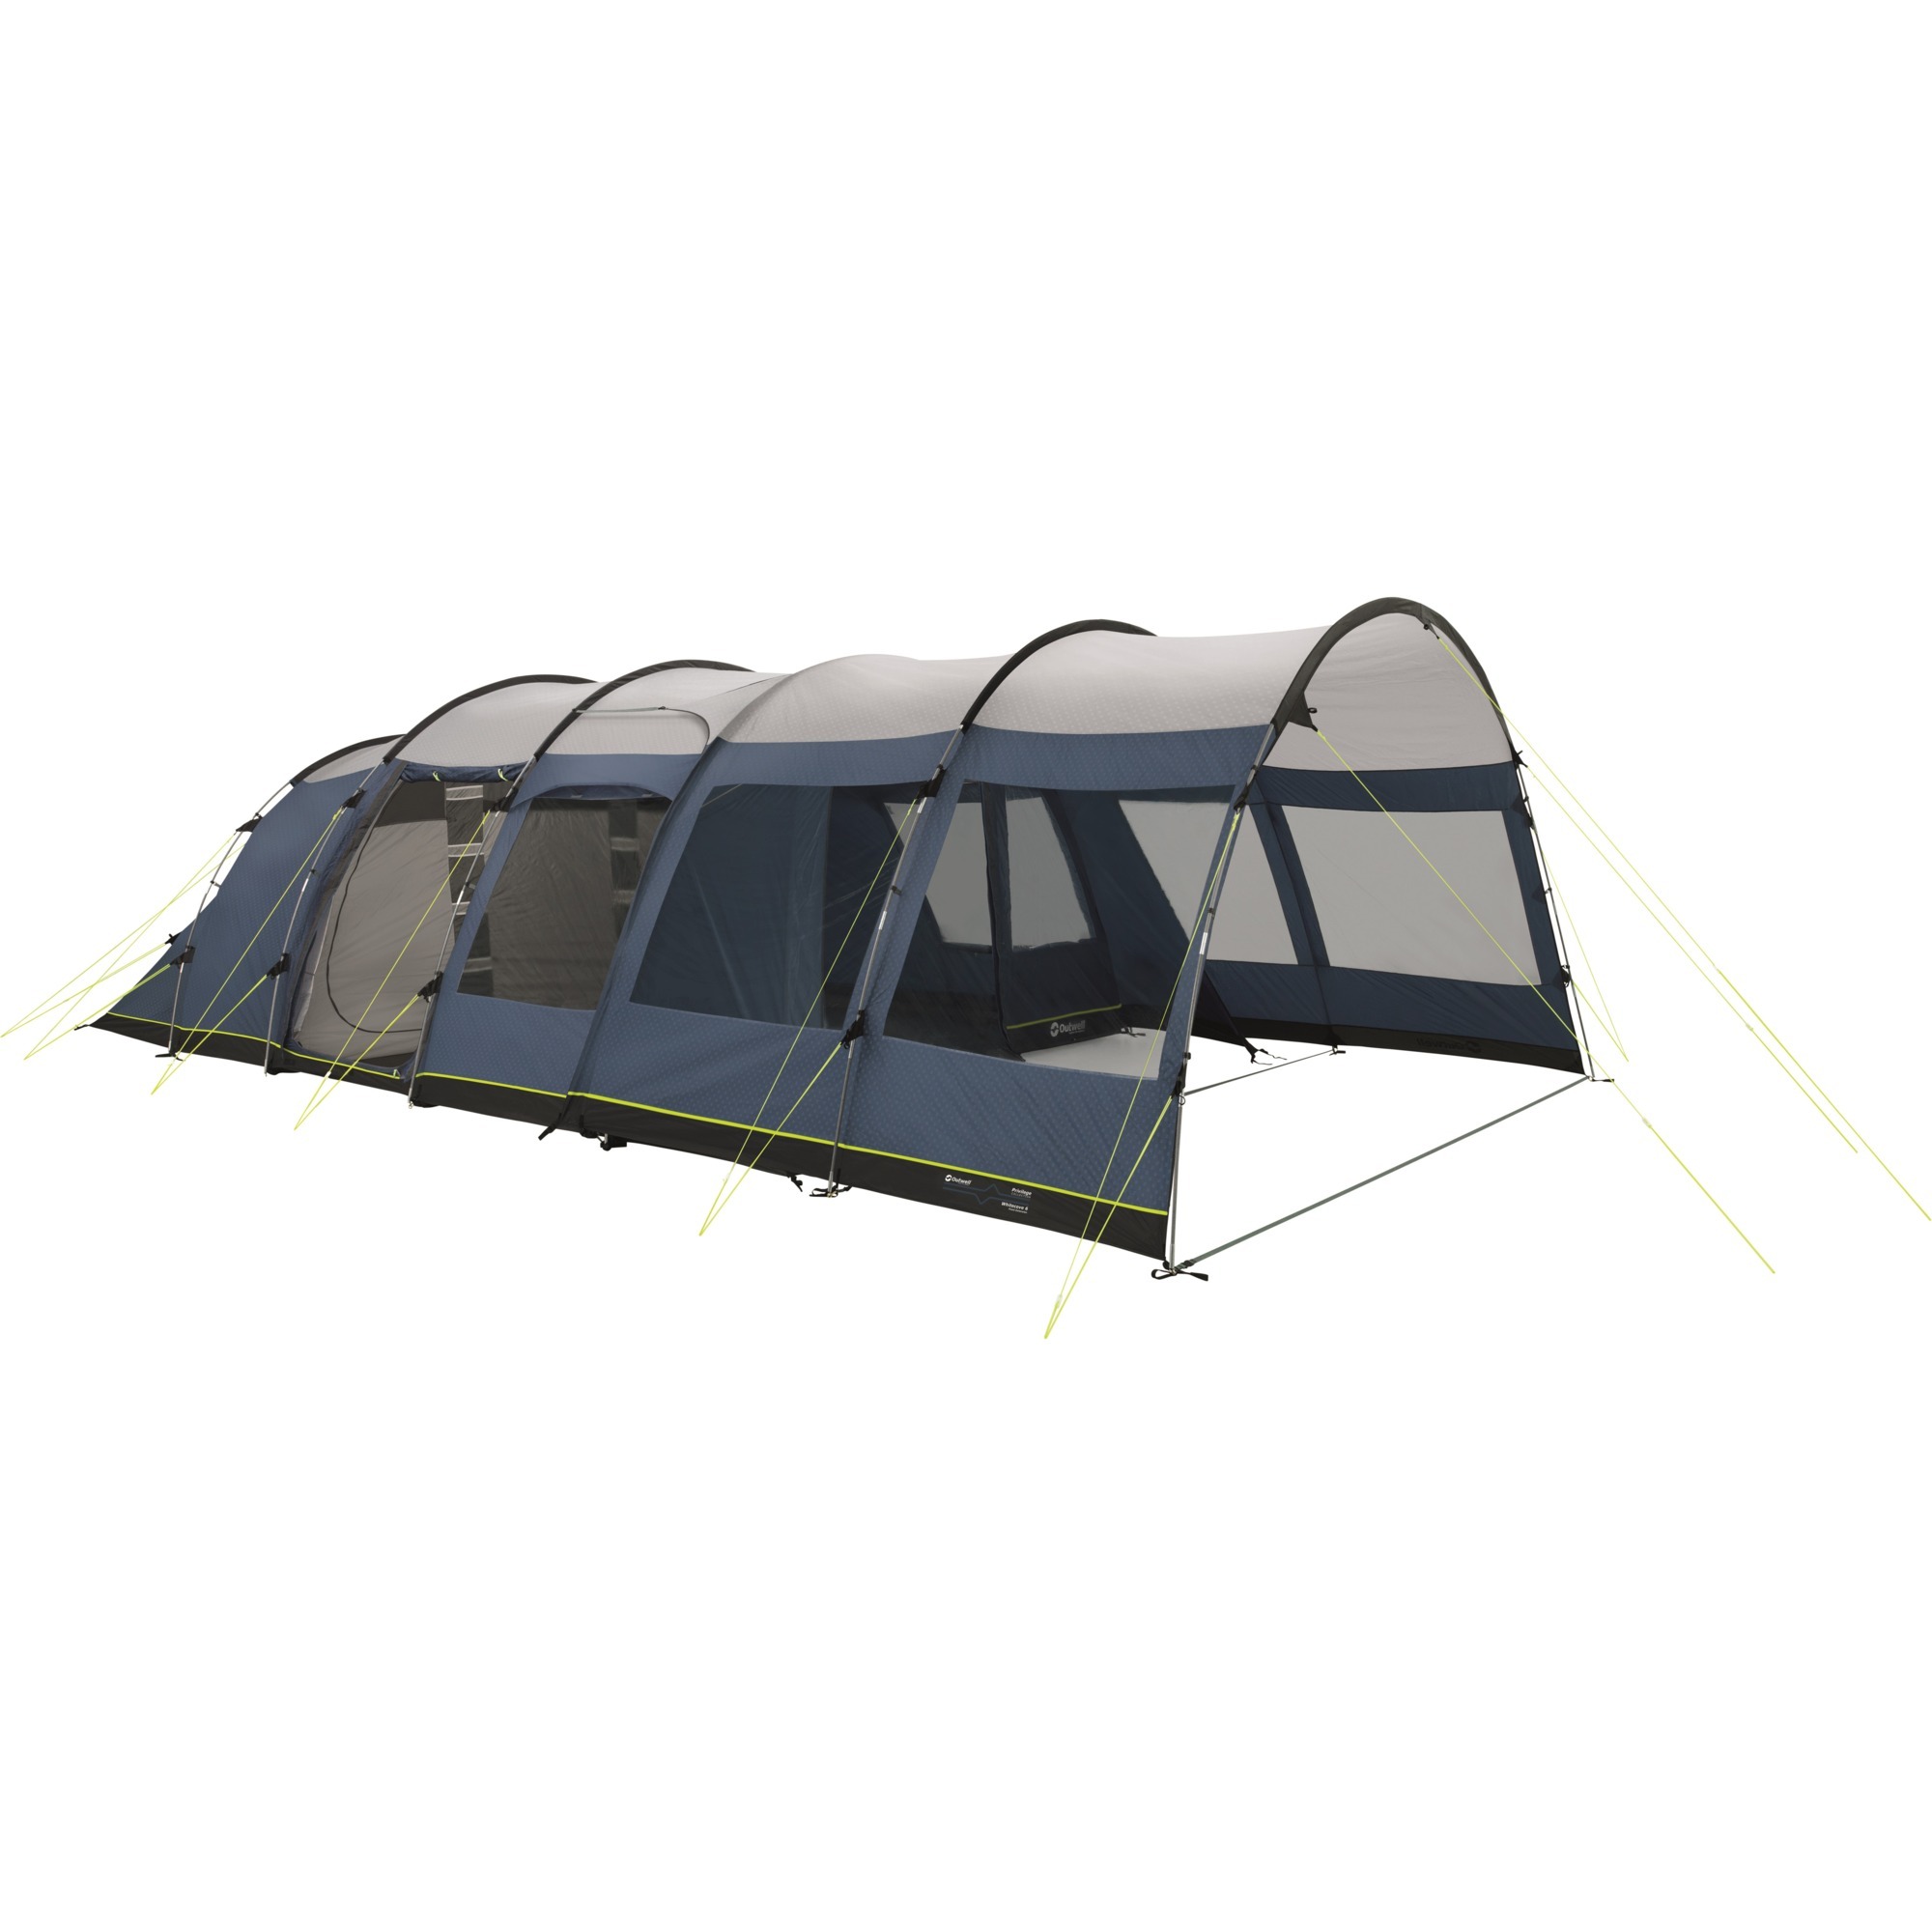 Rockwell 5 + Whitecove 5 Front Extension, Tent